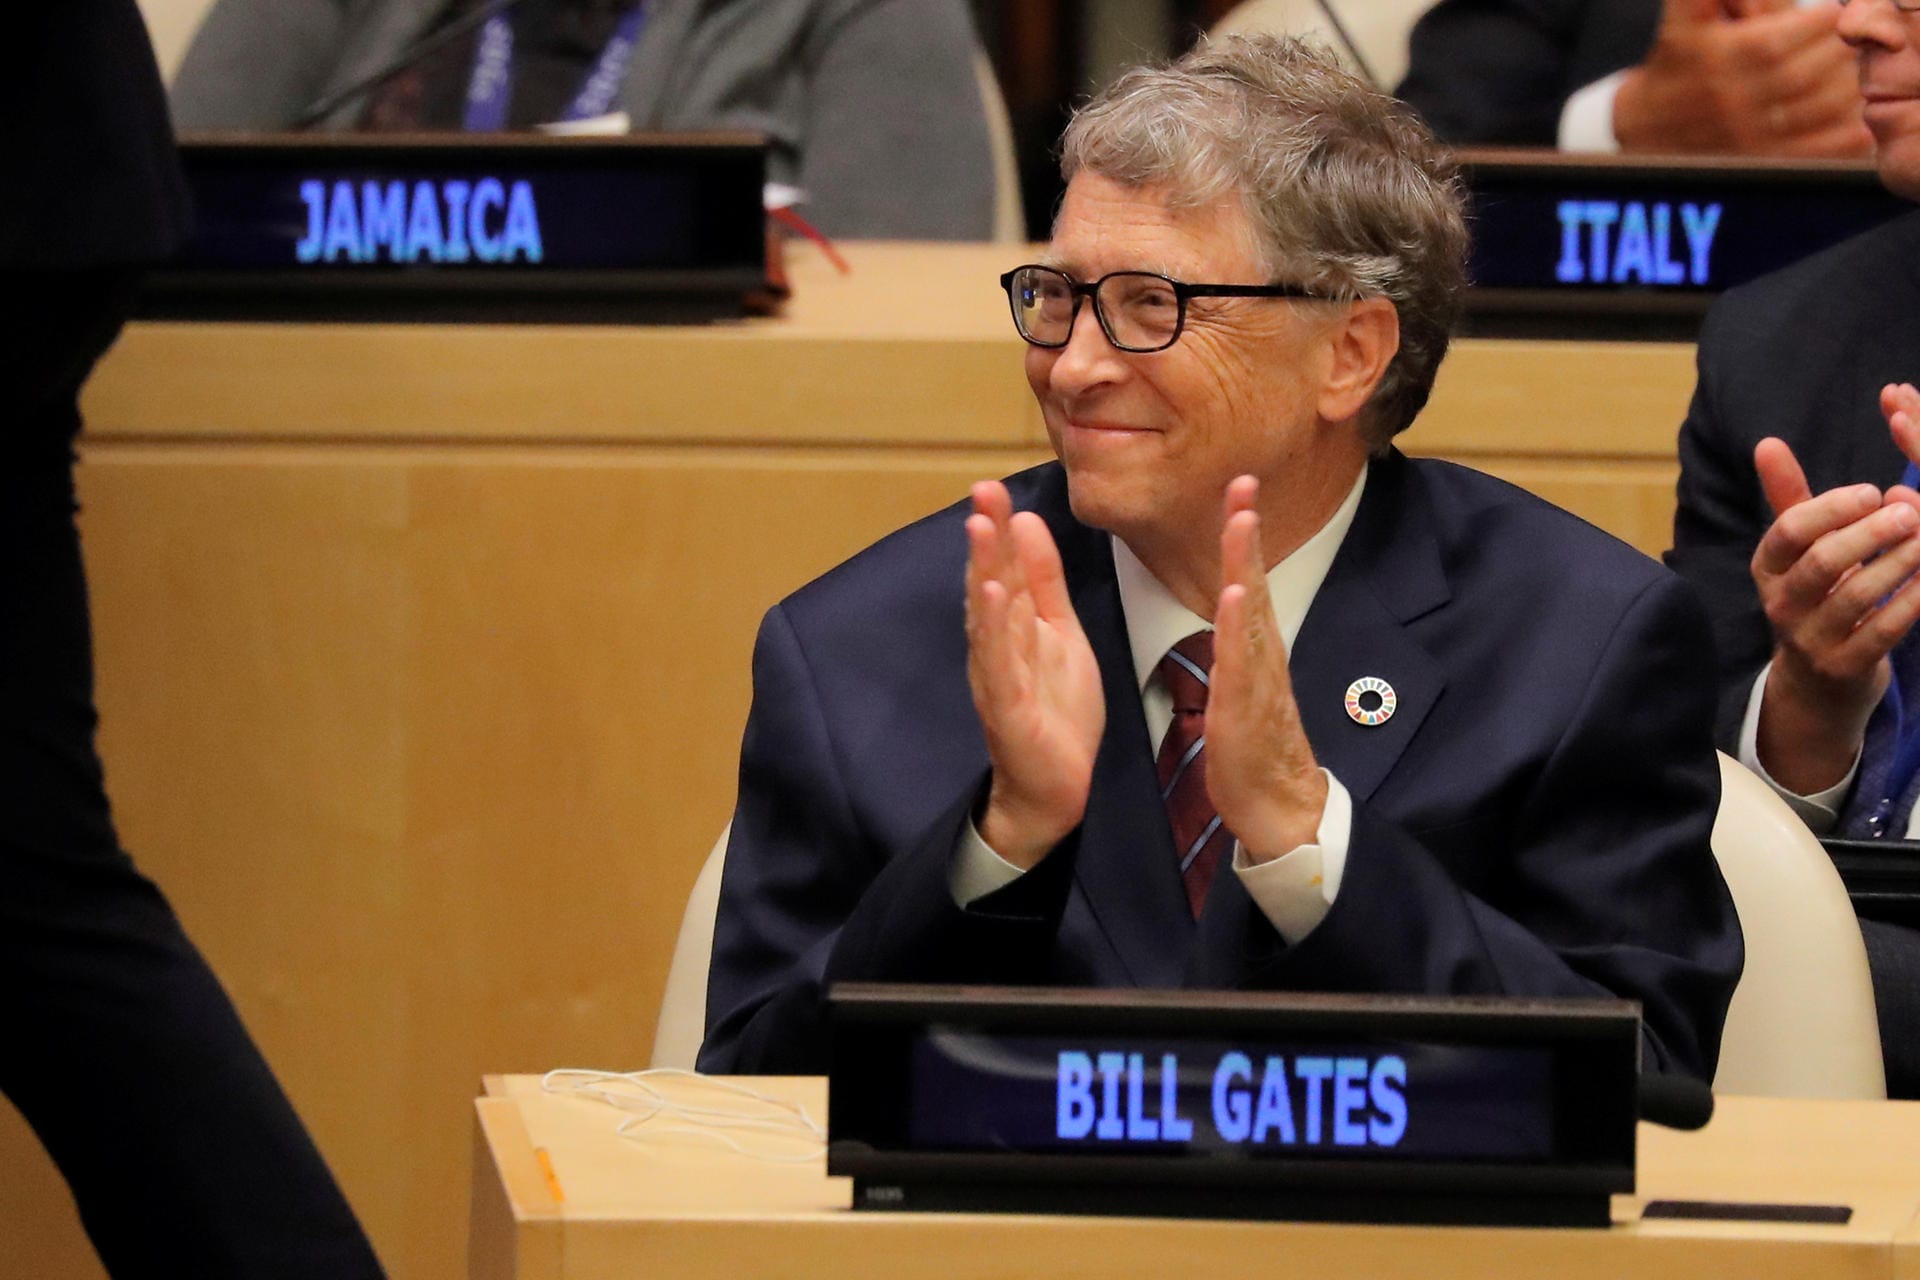 Microsoft Founder Bill Gates attends U.N. Secretary General's meeting on Financing during 73rd United Nations General Assembly